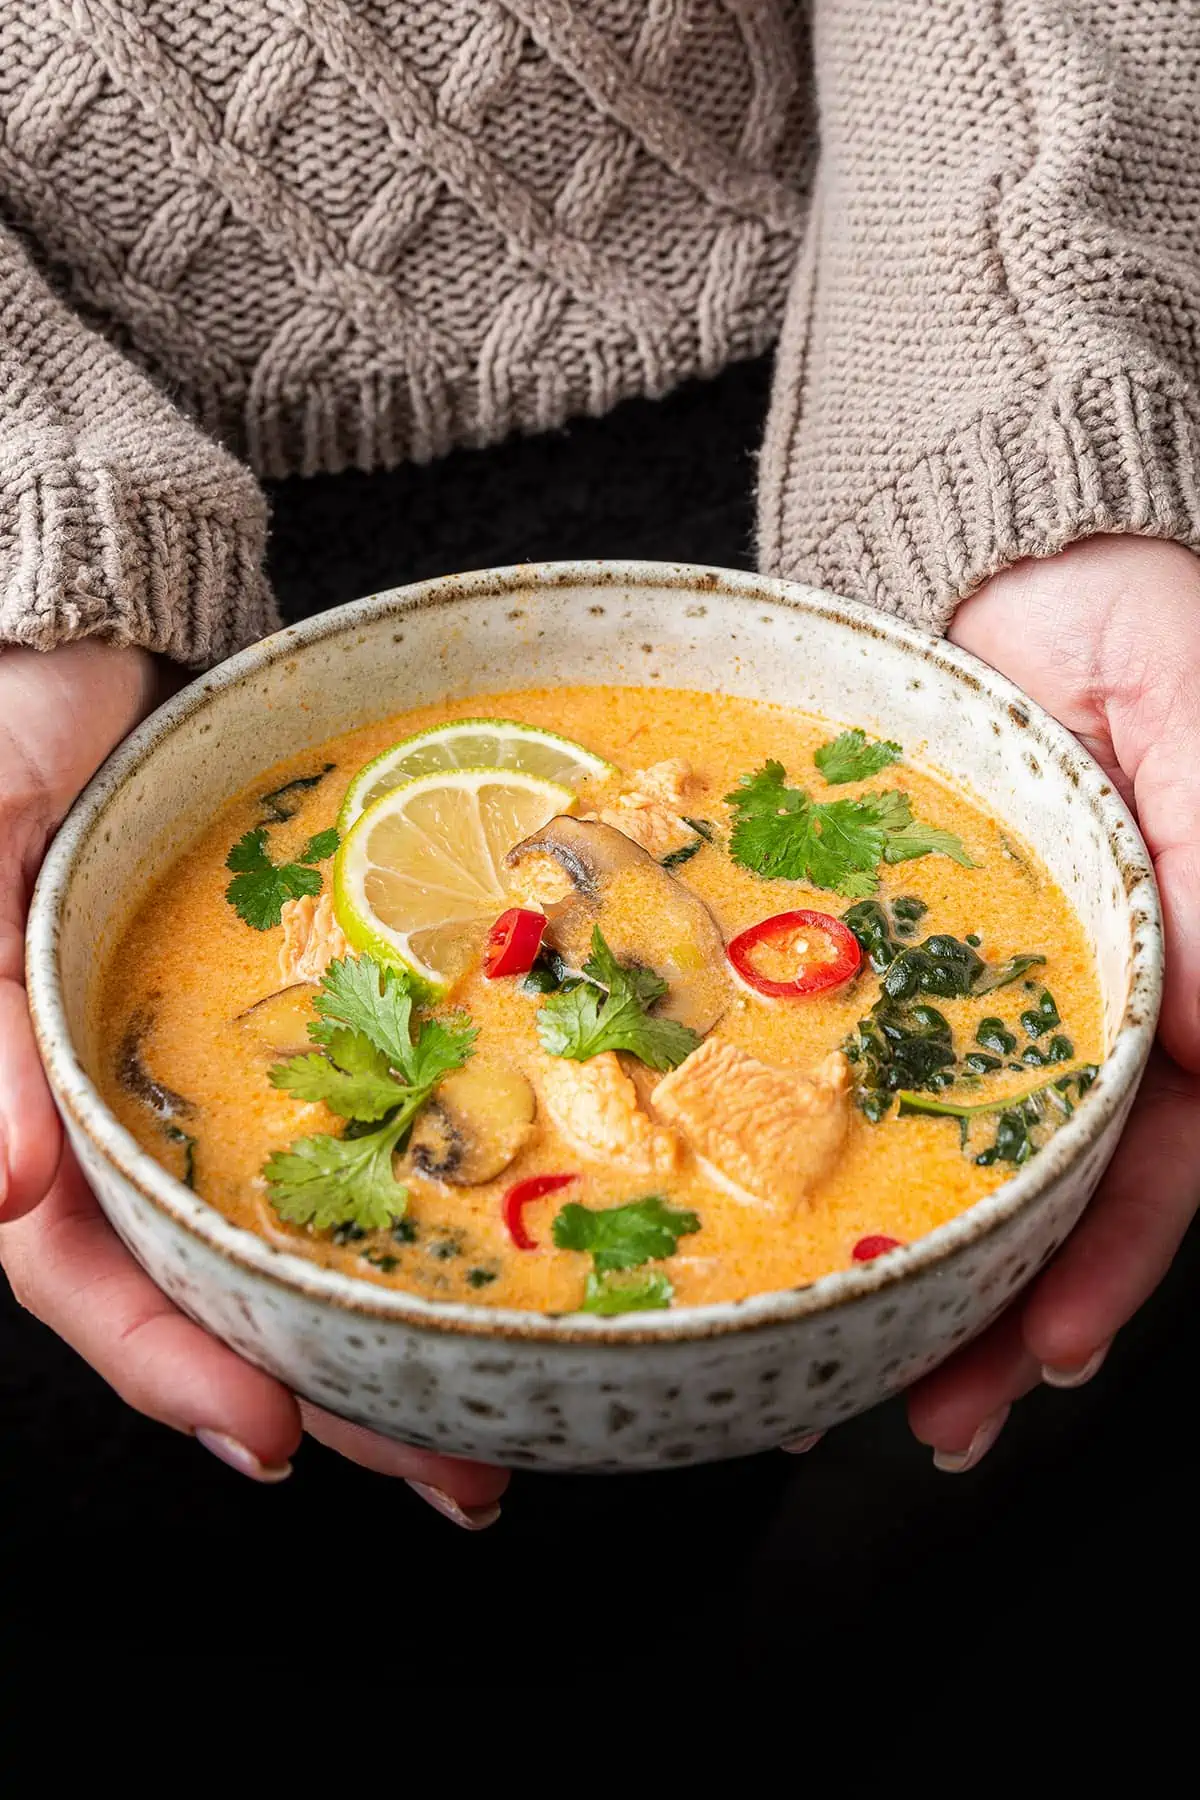 A bowl of Thai coconut curry sou, topped with chilis, limes, and cilantro, being held in two hands.